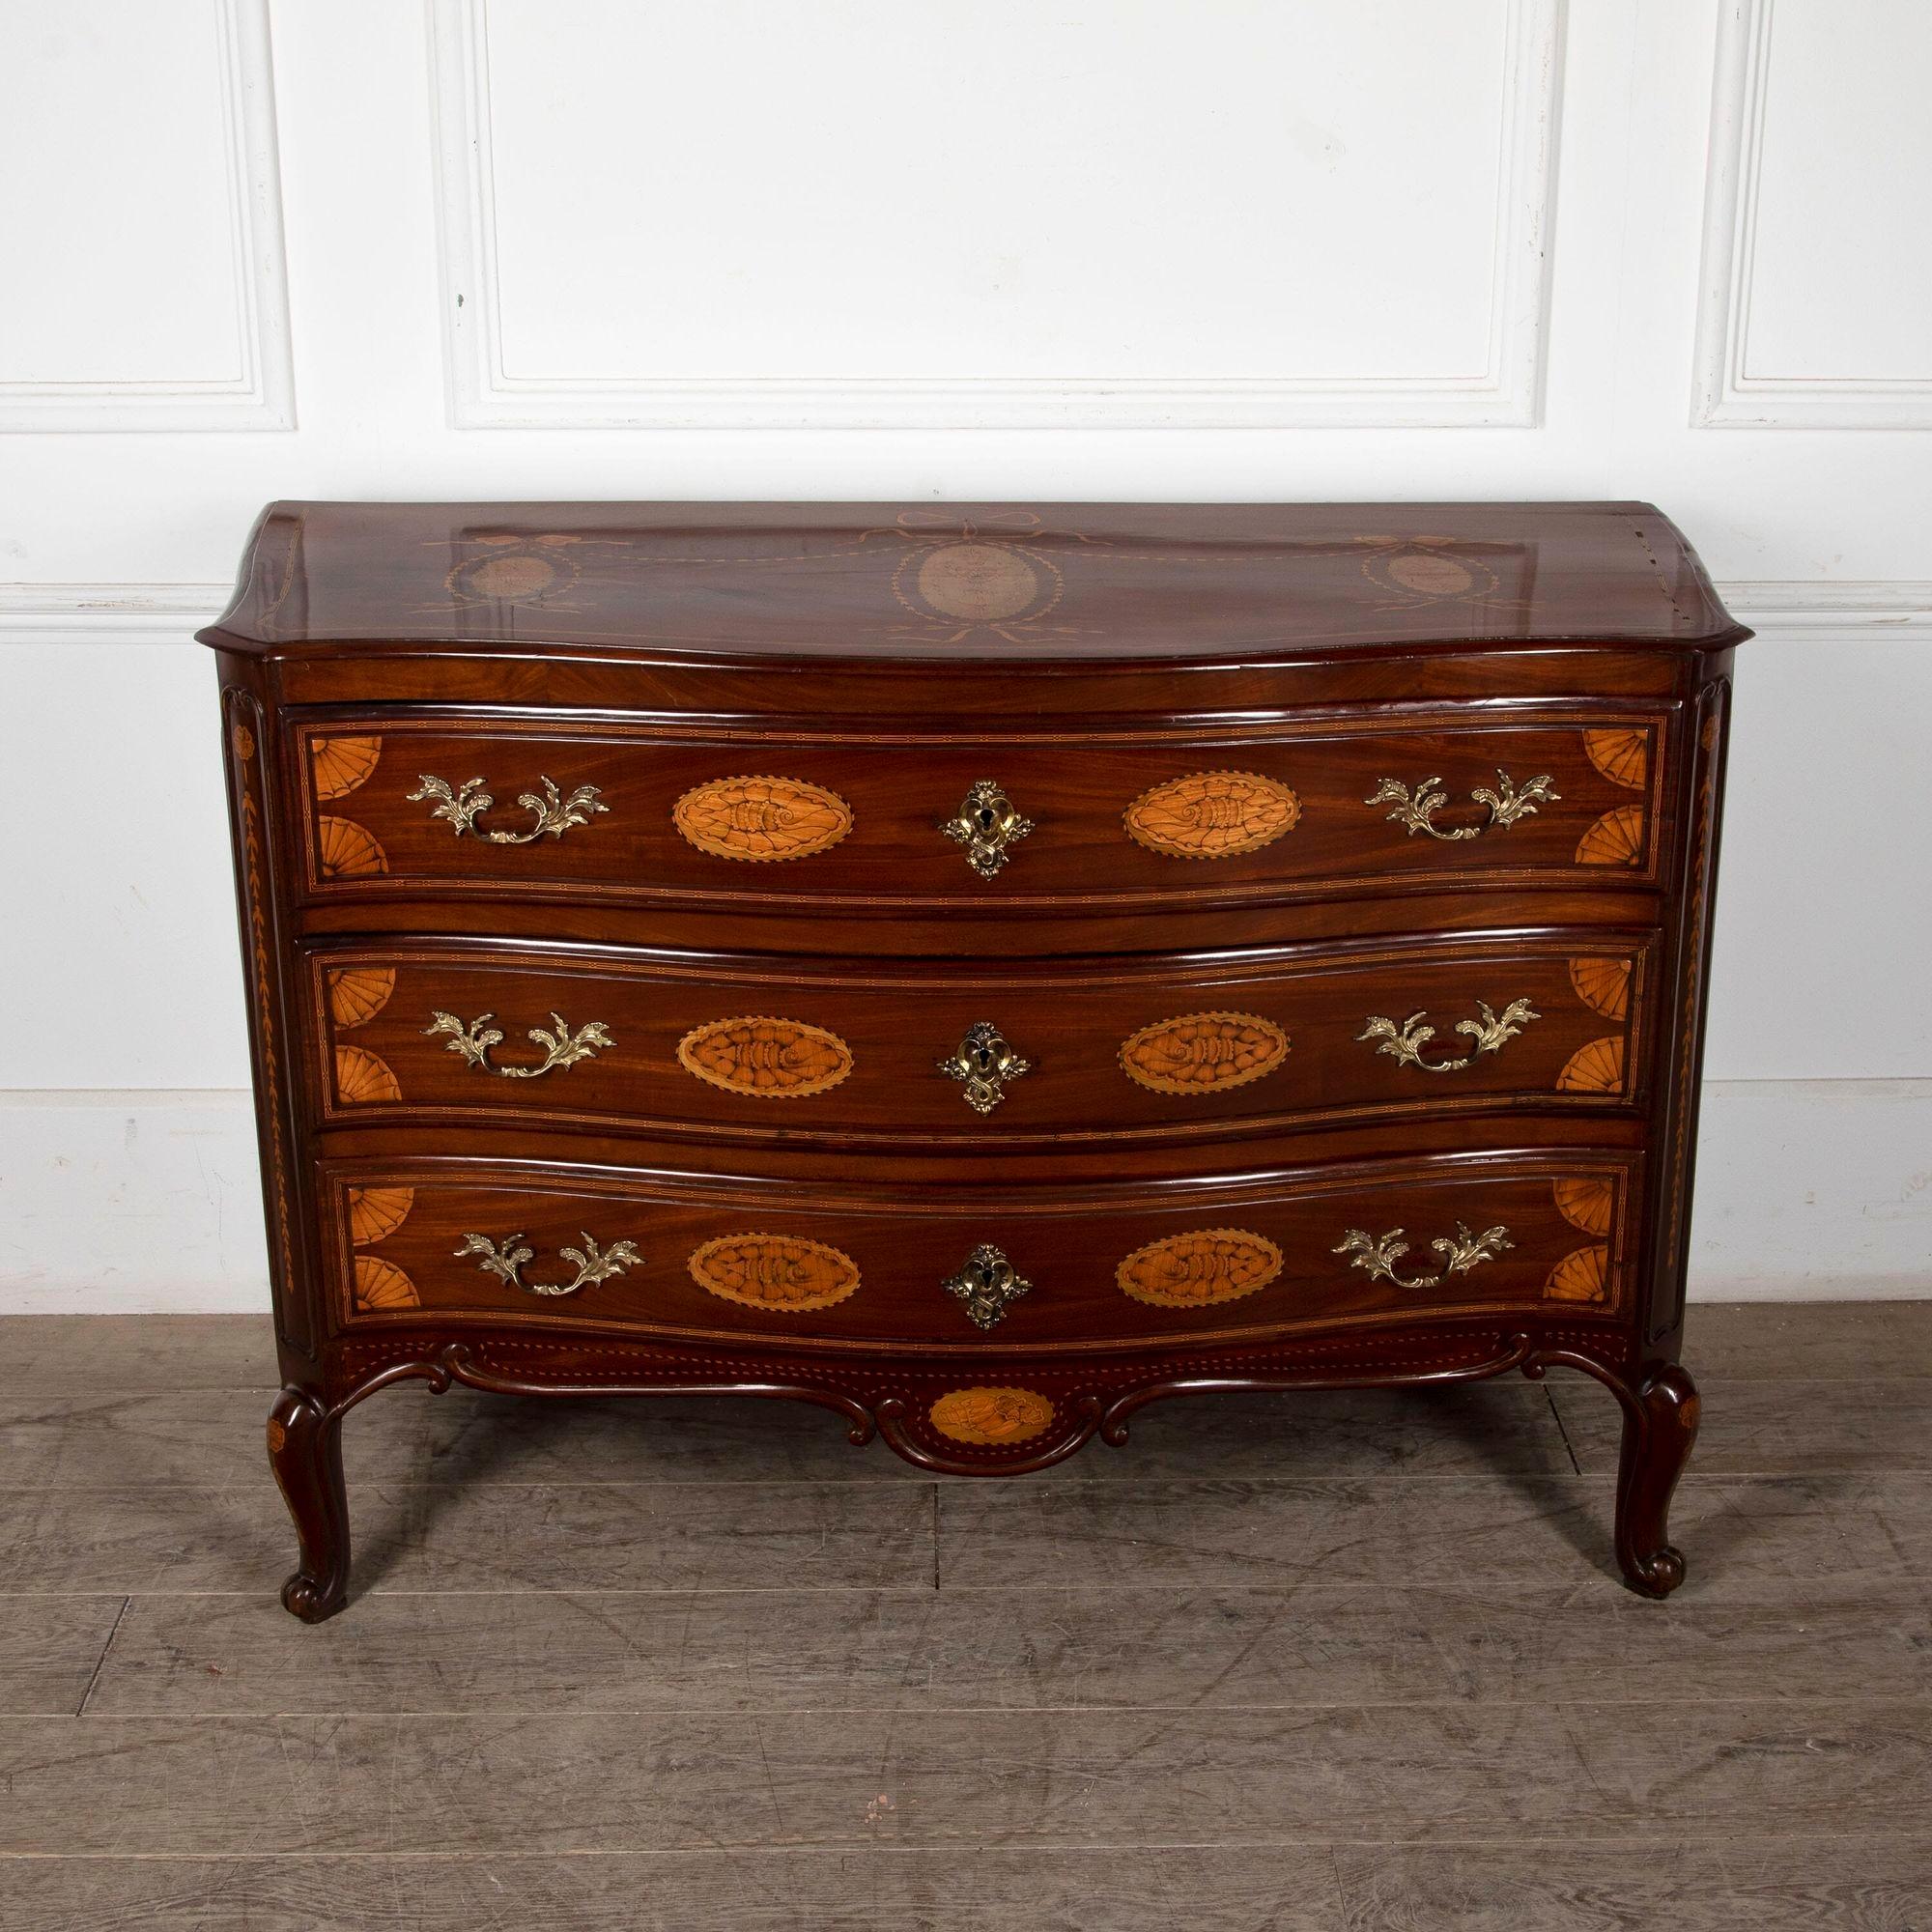 Fine quality 18th century Serpentine commode in mahogany and satinwood inlay. 
This commode stands well and is beautifully proportioned with its serpentine front and shell inlay. With swags to the top and drawer fronts.